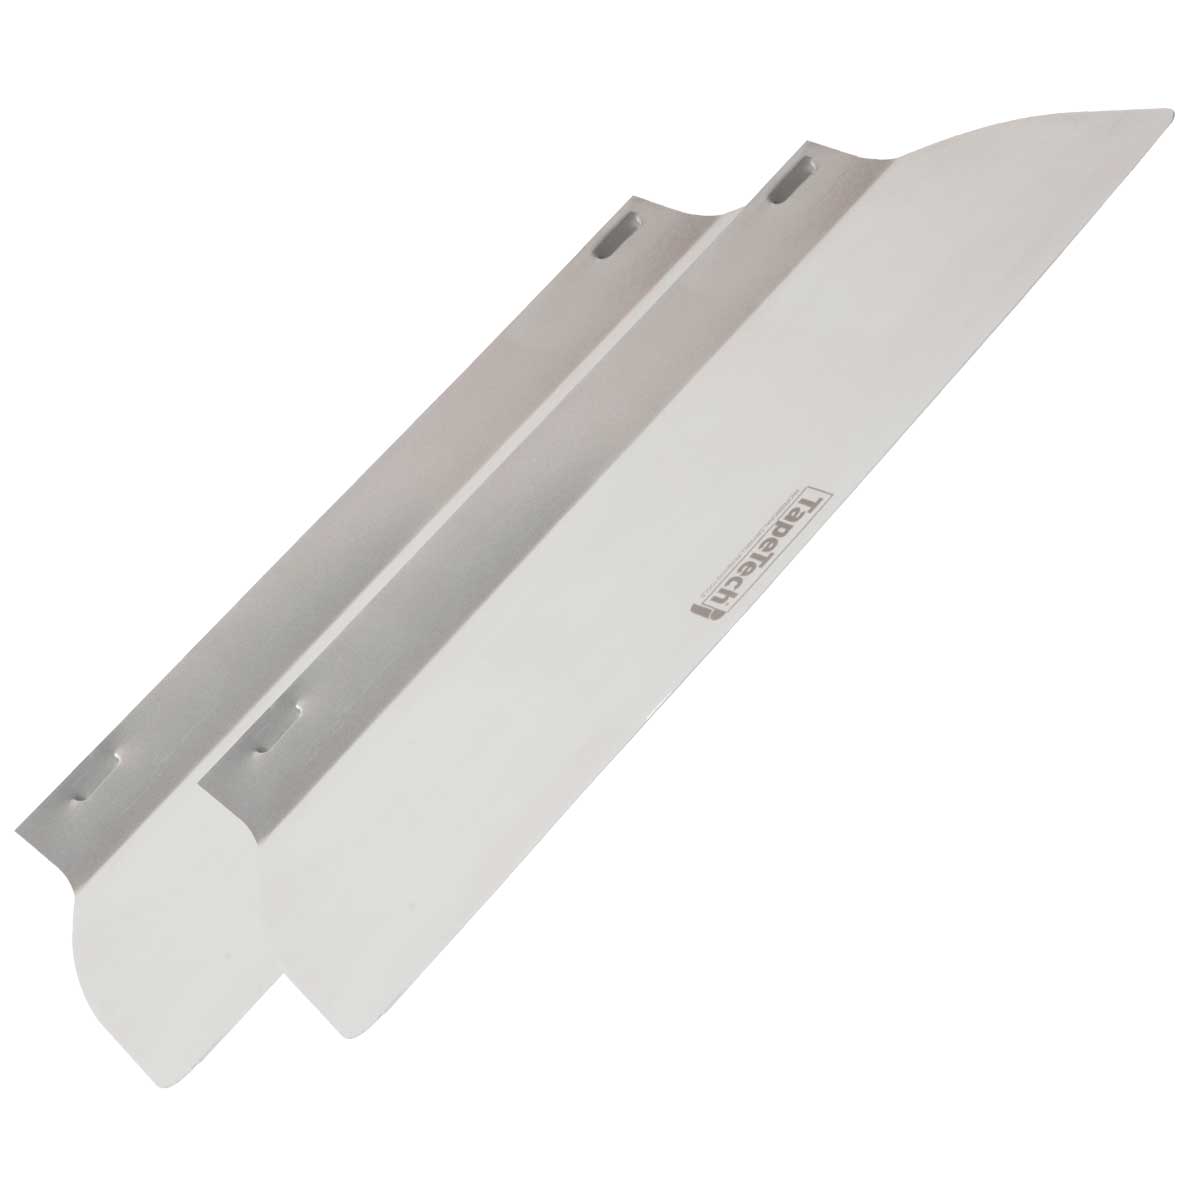 TapeTech Replacement Finishing Knife Blade (2 pack)